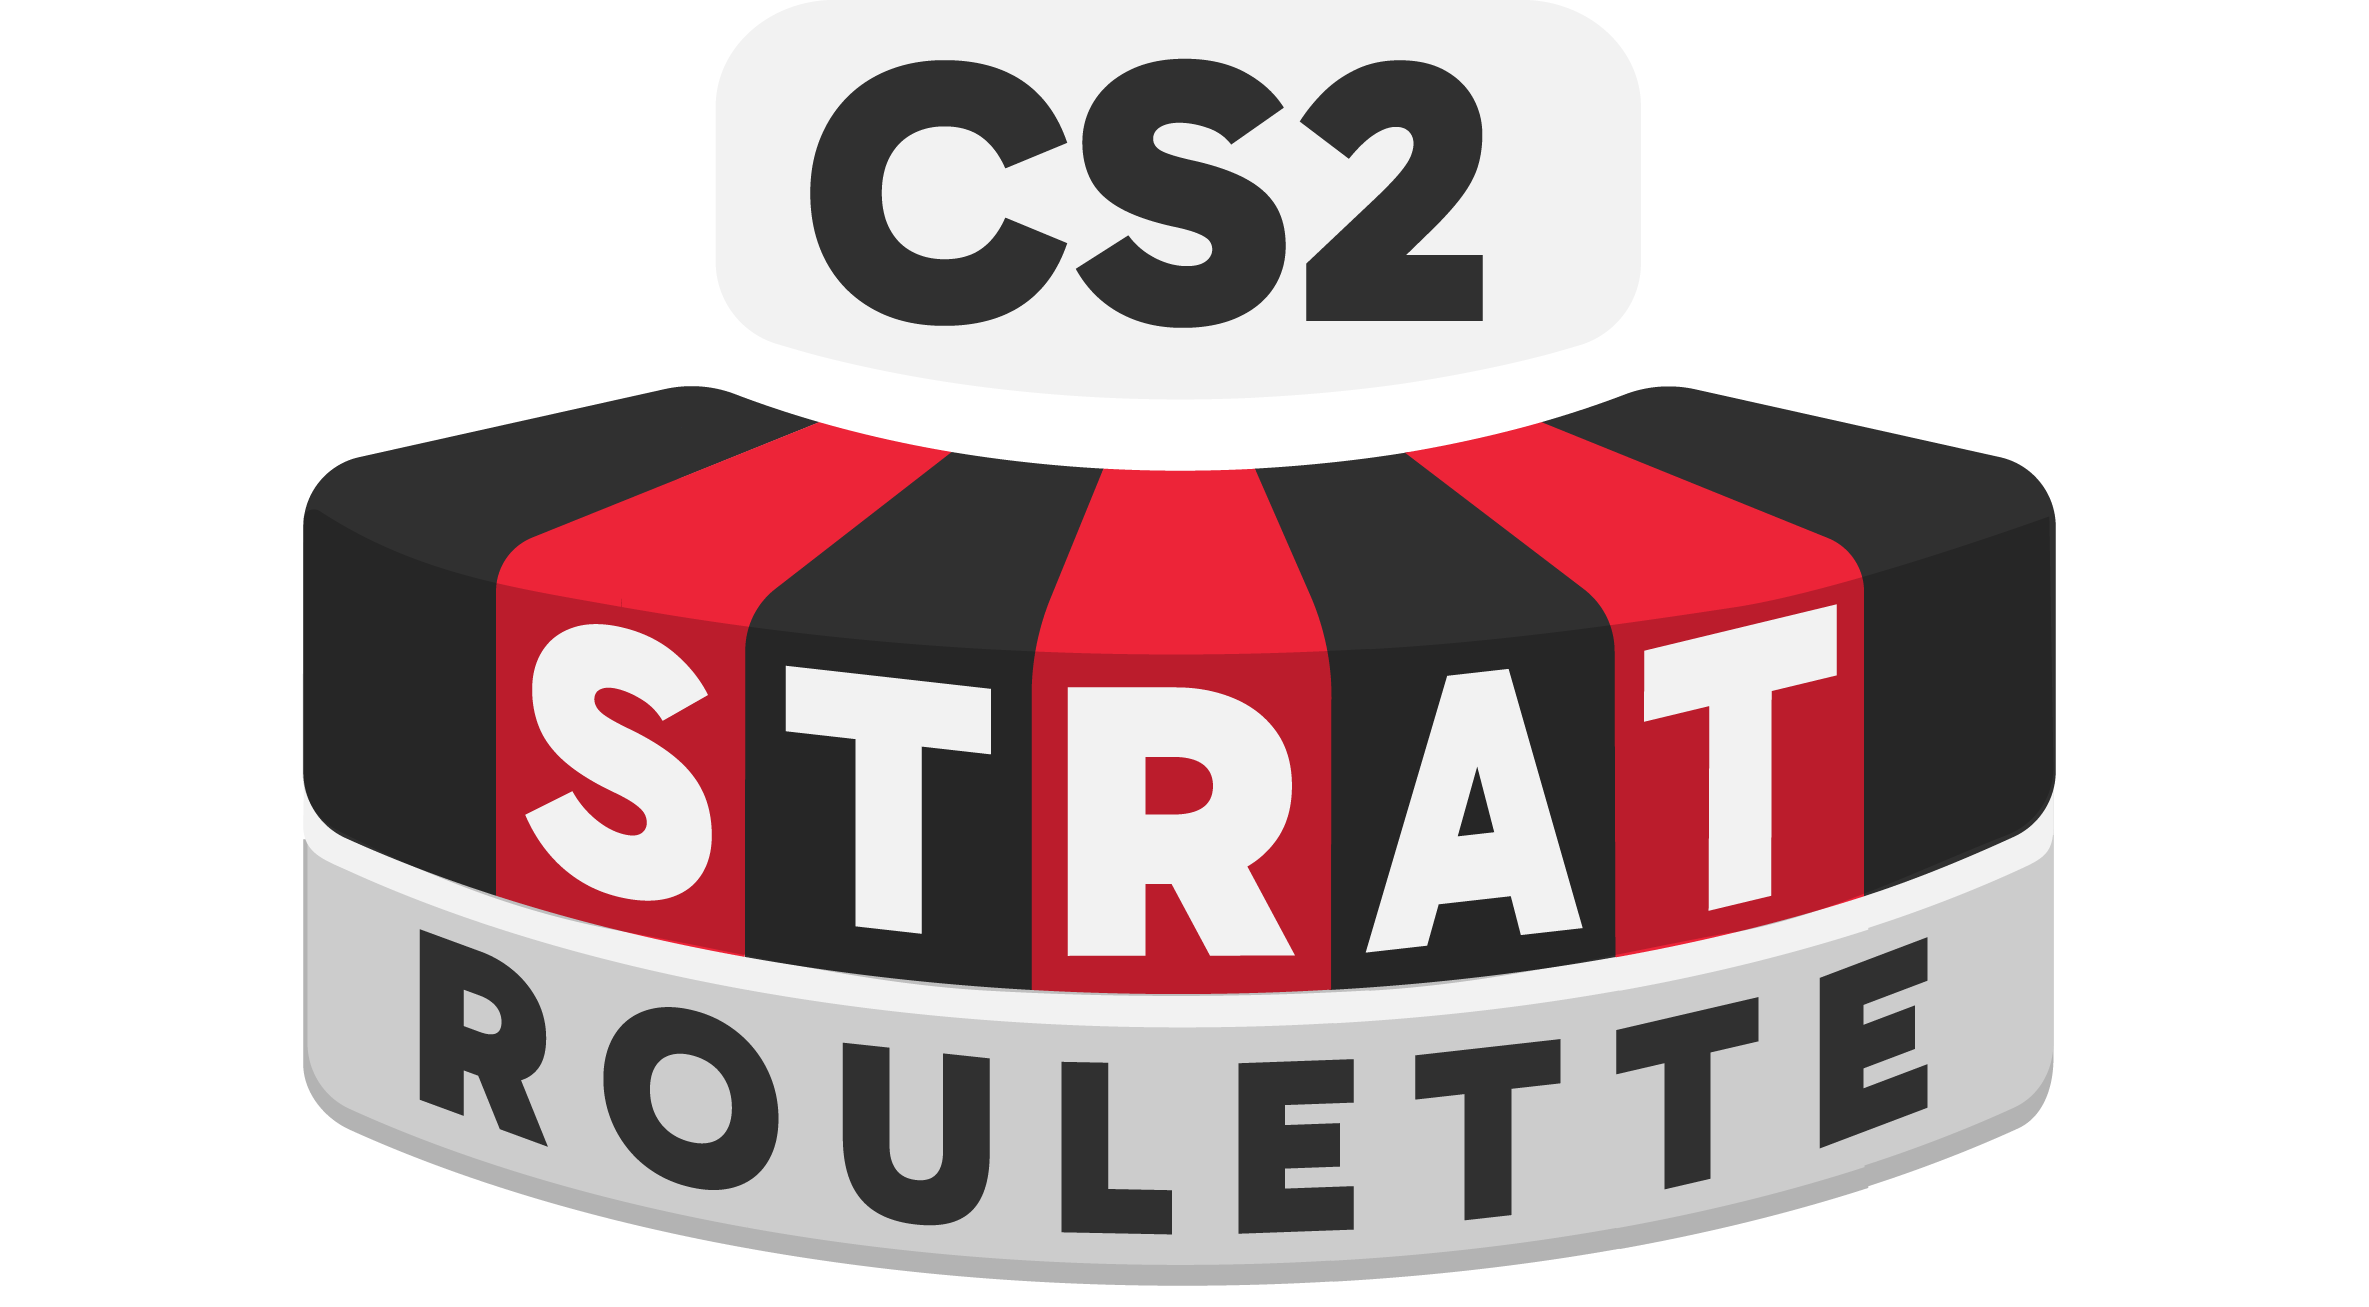 Logo for CS2 Strat Roulette featuring a circular badge with the CS2 logo at the top, red and black segmented wheel, and the words STRAT ROULETTE prominently displayed in a bold, white font